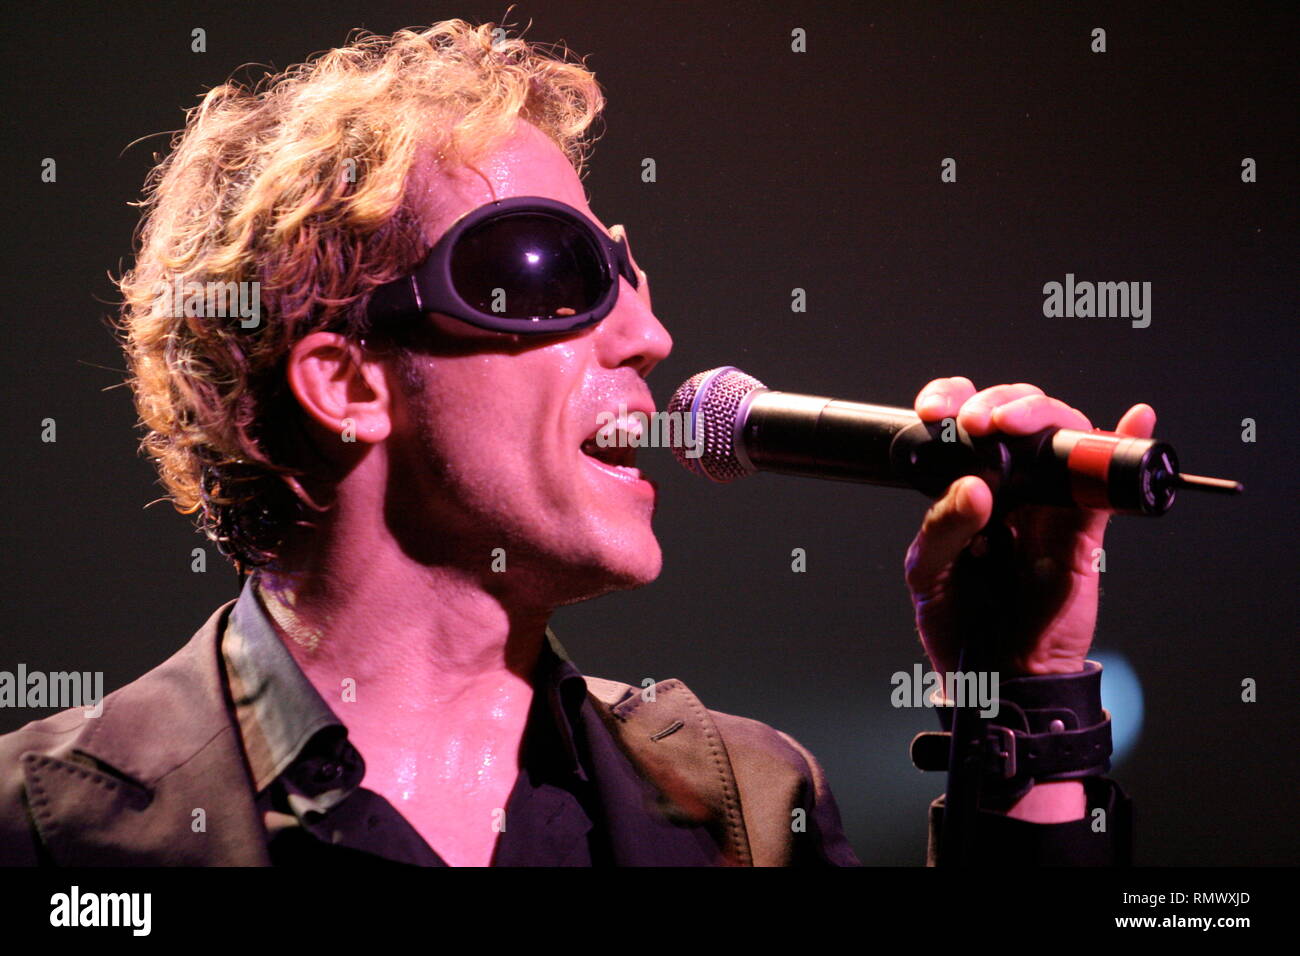 Extreme vocalist Gary Cherone is shown on stage during a 'live' concert performance. Stock Photo